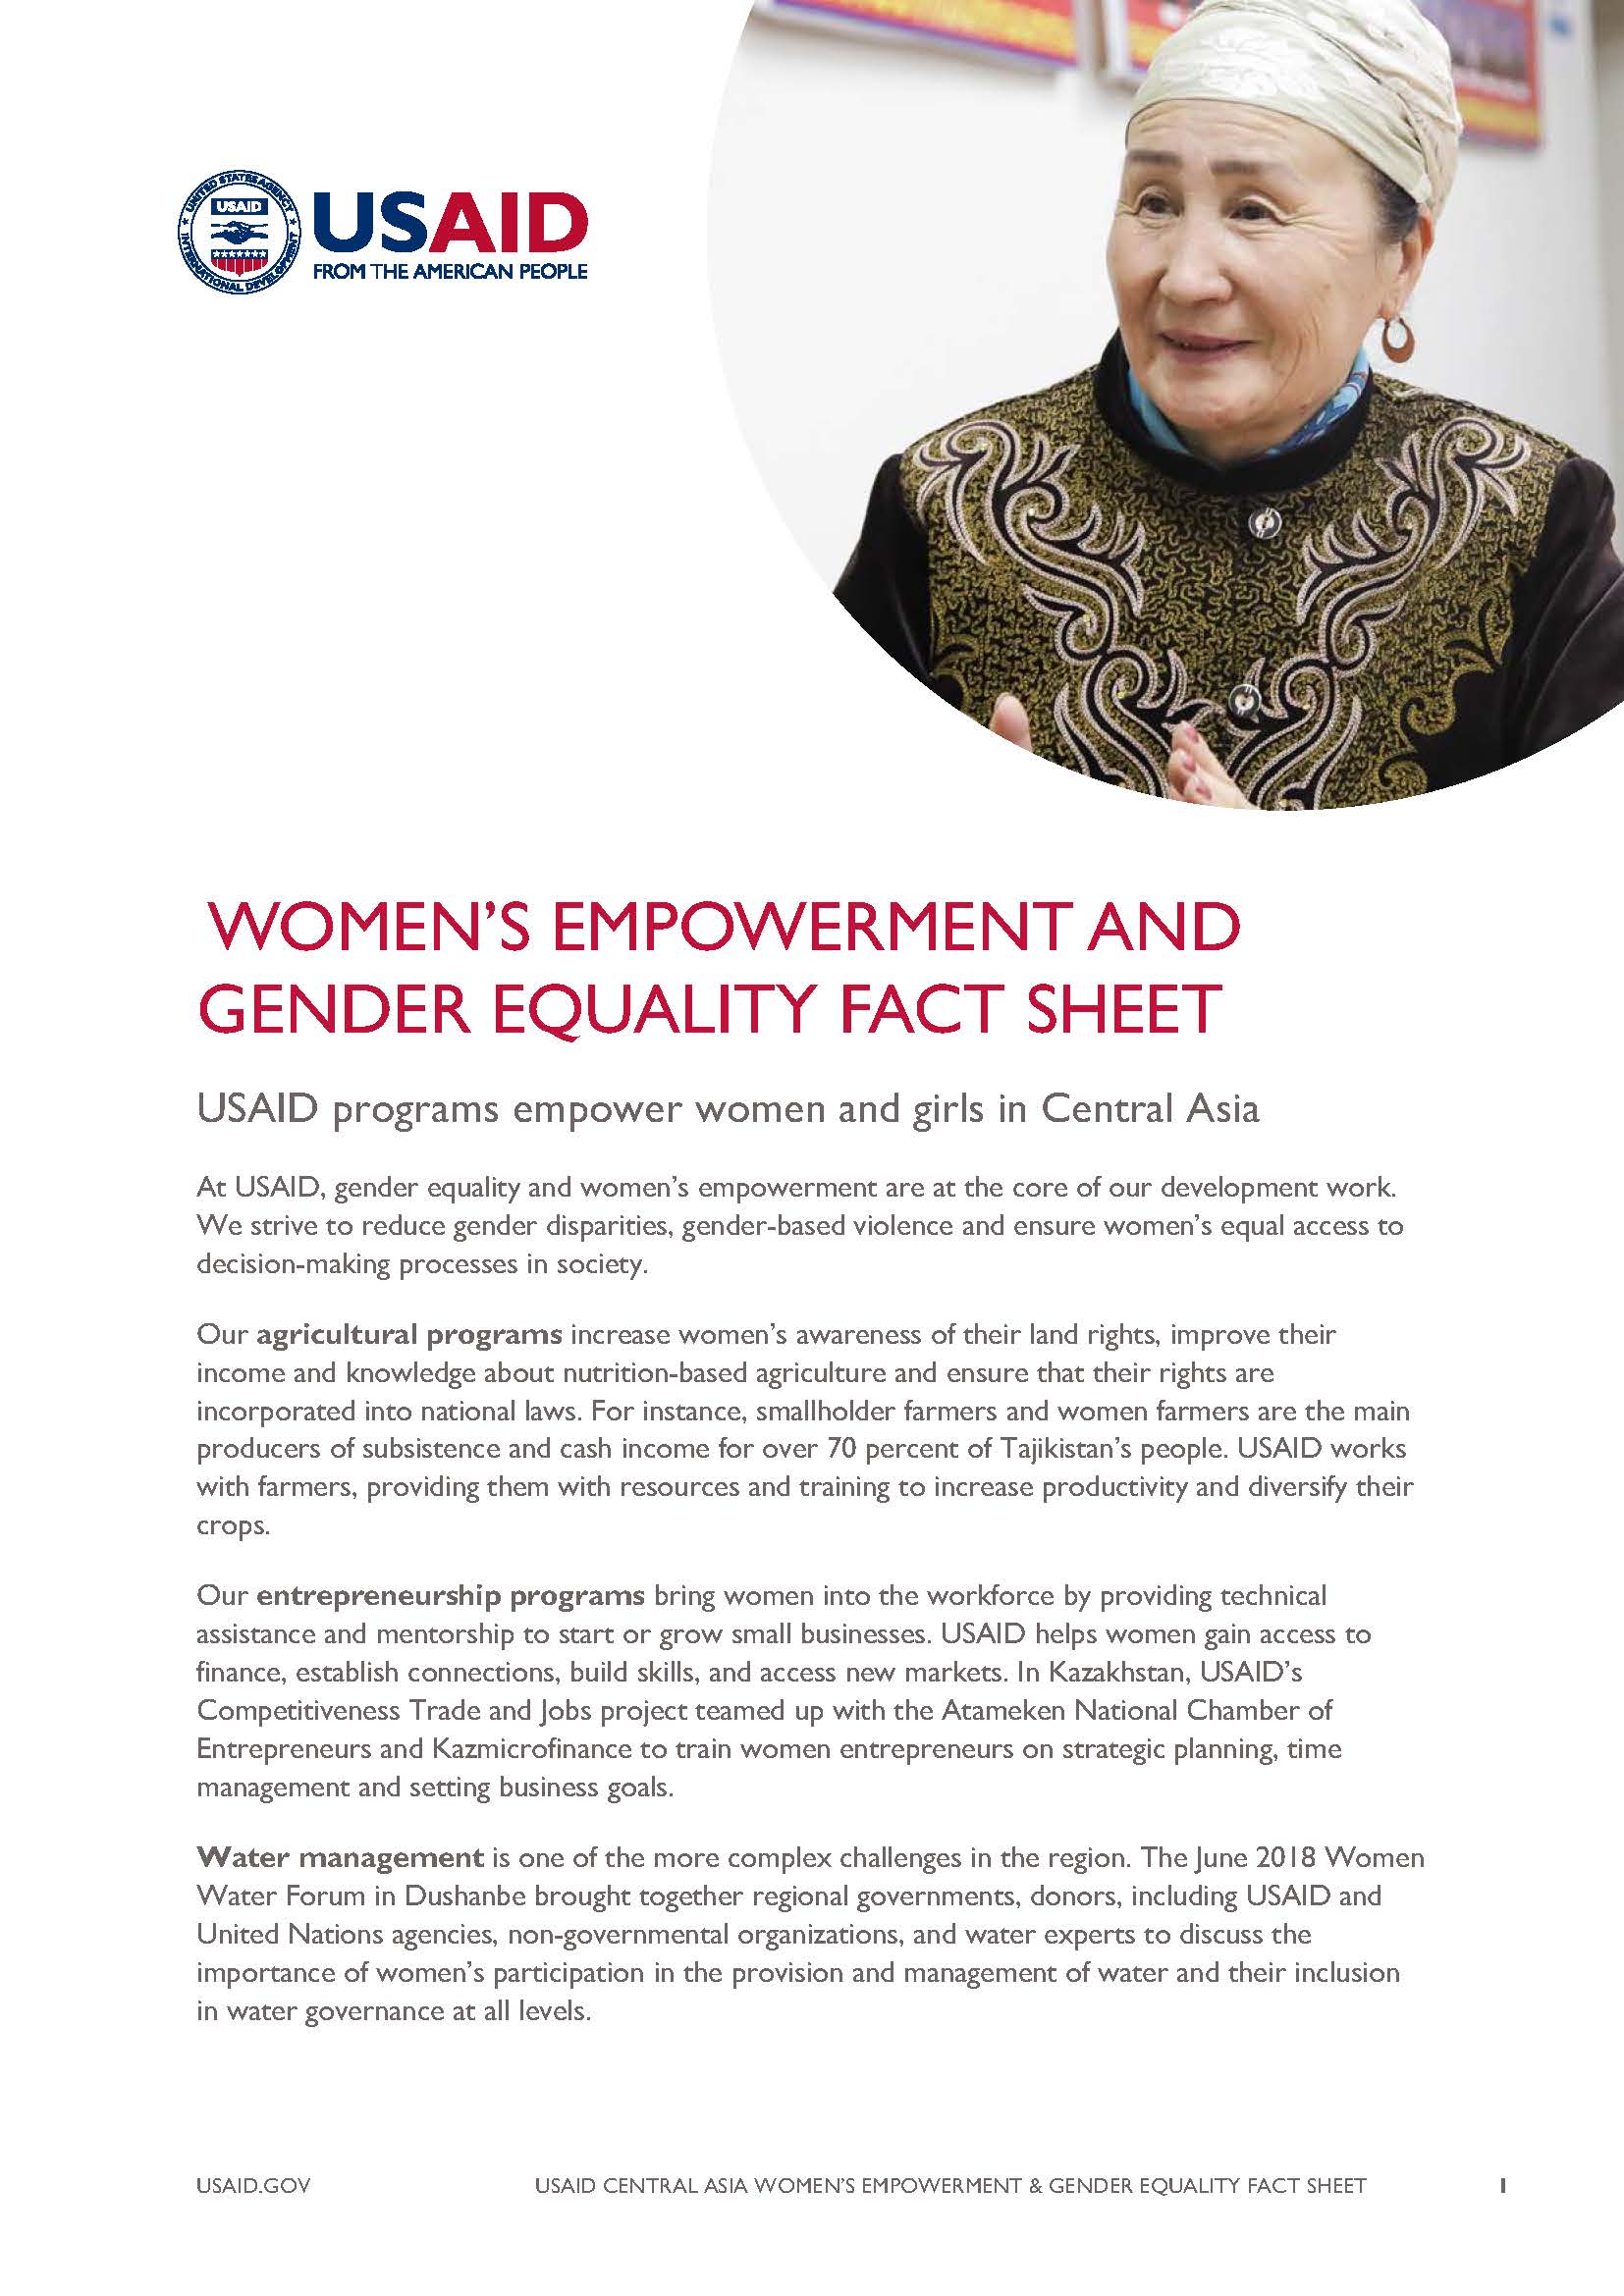 Women's Empowerment and Gender Equality Fact Sheet